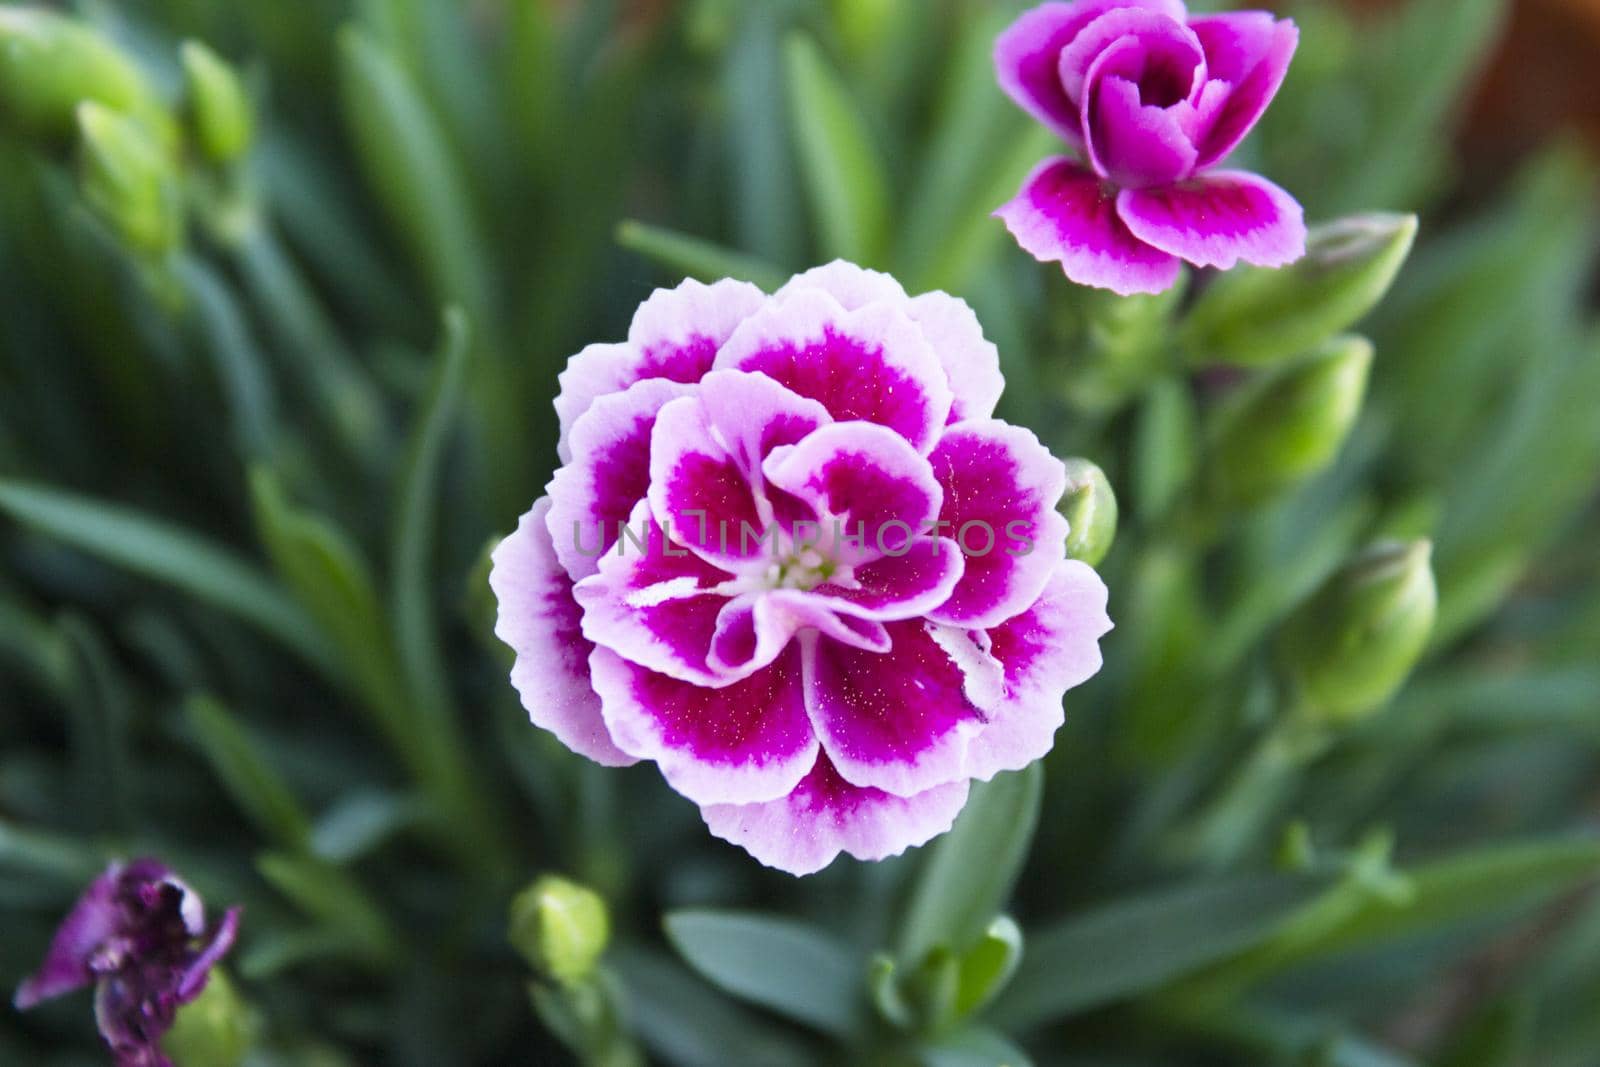 Carnation flower variety, in pink color. No people